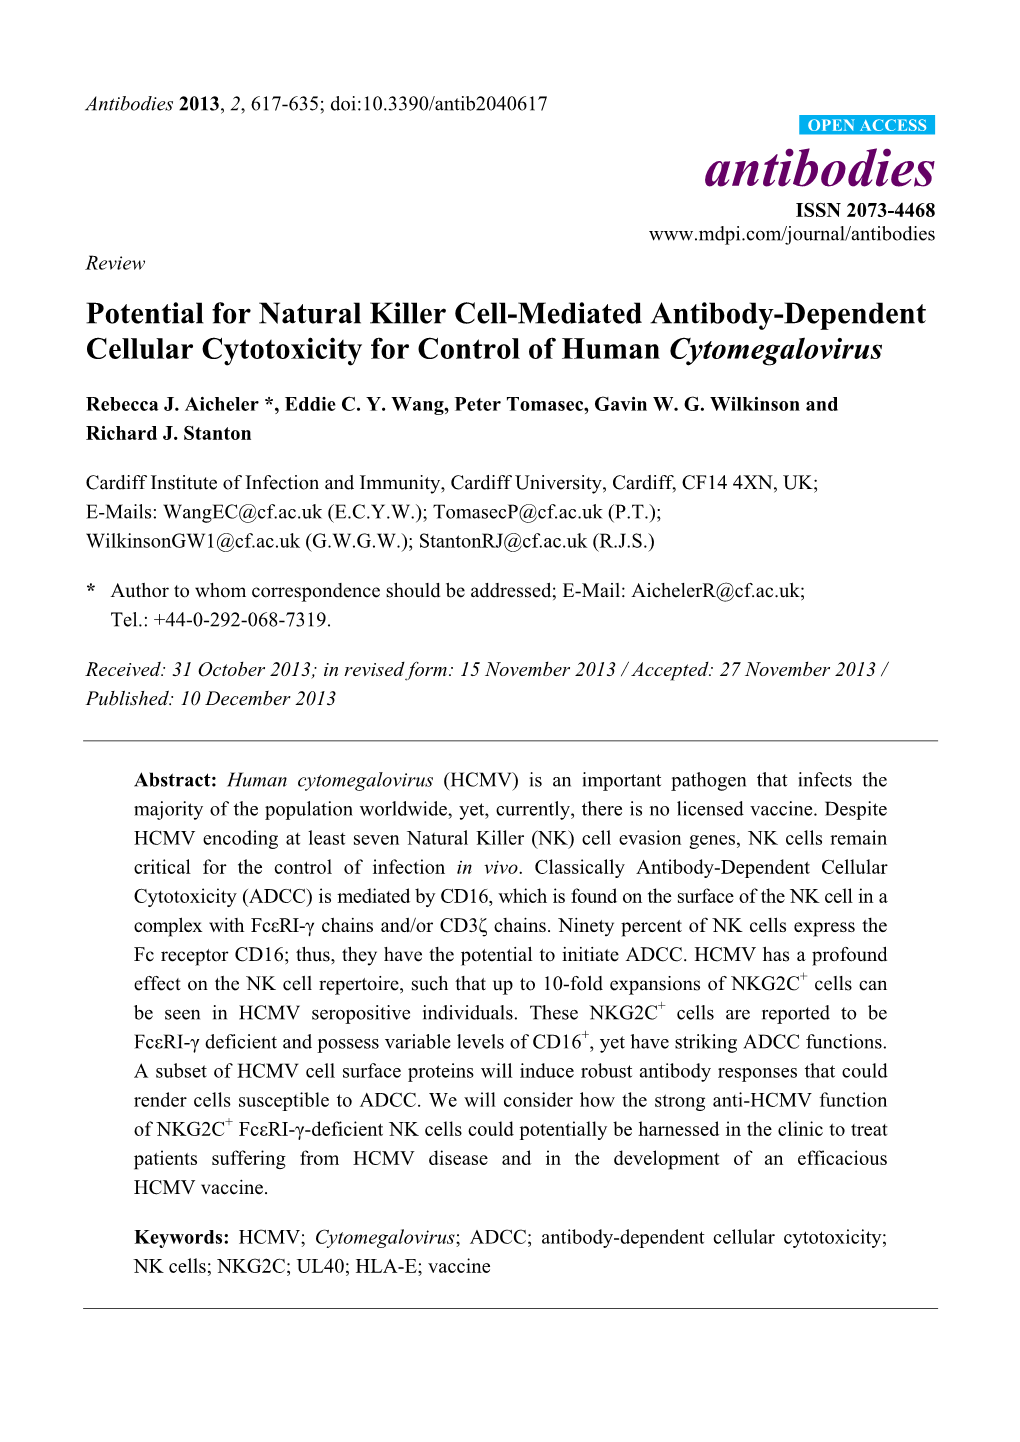 Potential for Natural Killer Cell-Mediated Antibody-Dependent Cellular Cytotoxicity for Control of Human Cytomegalovirus